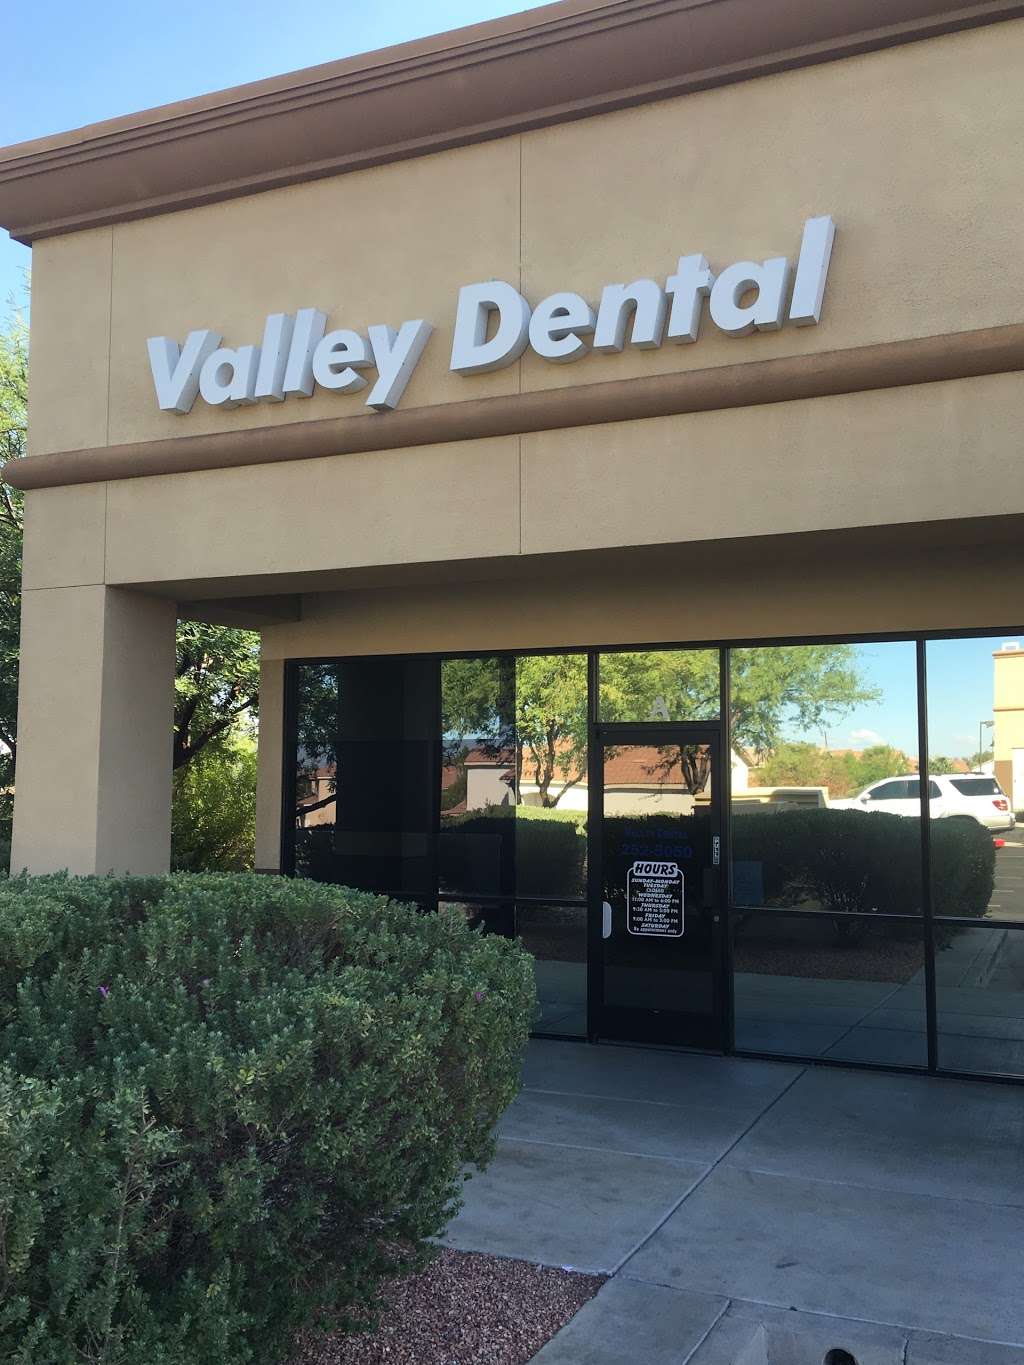 South Valley Dental | 555 College Dr, Henderson, NV 89015 | Phone: (702) 252-5050